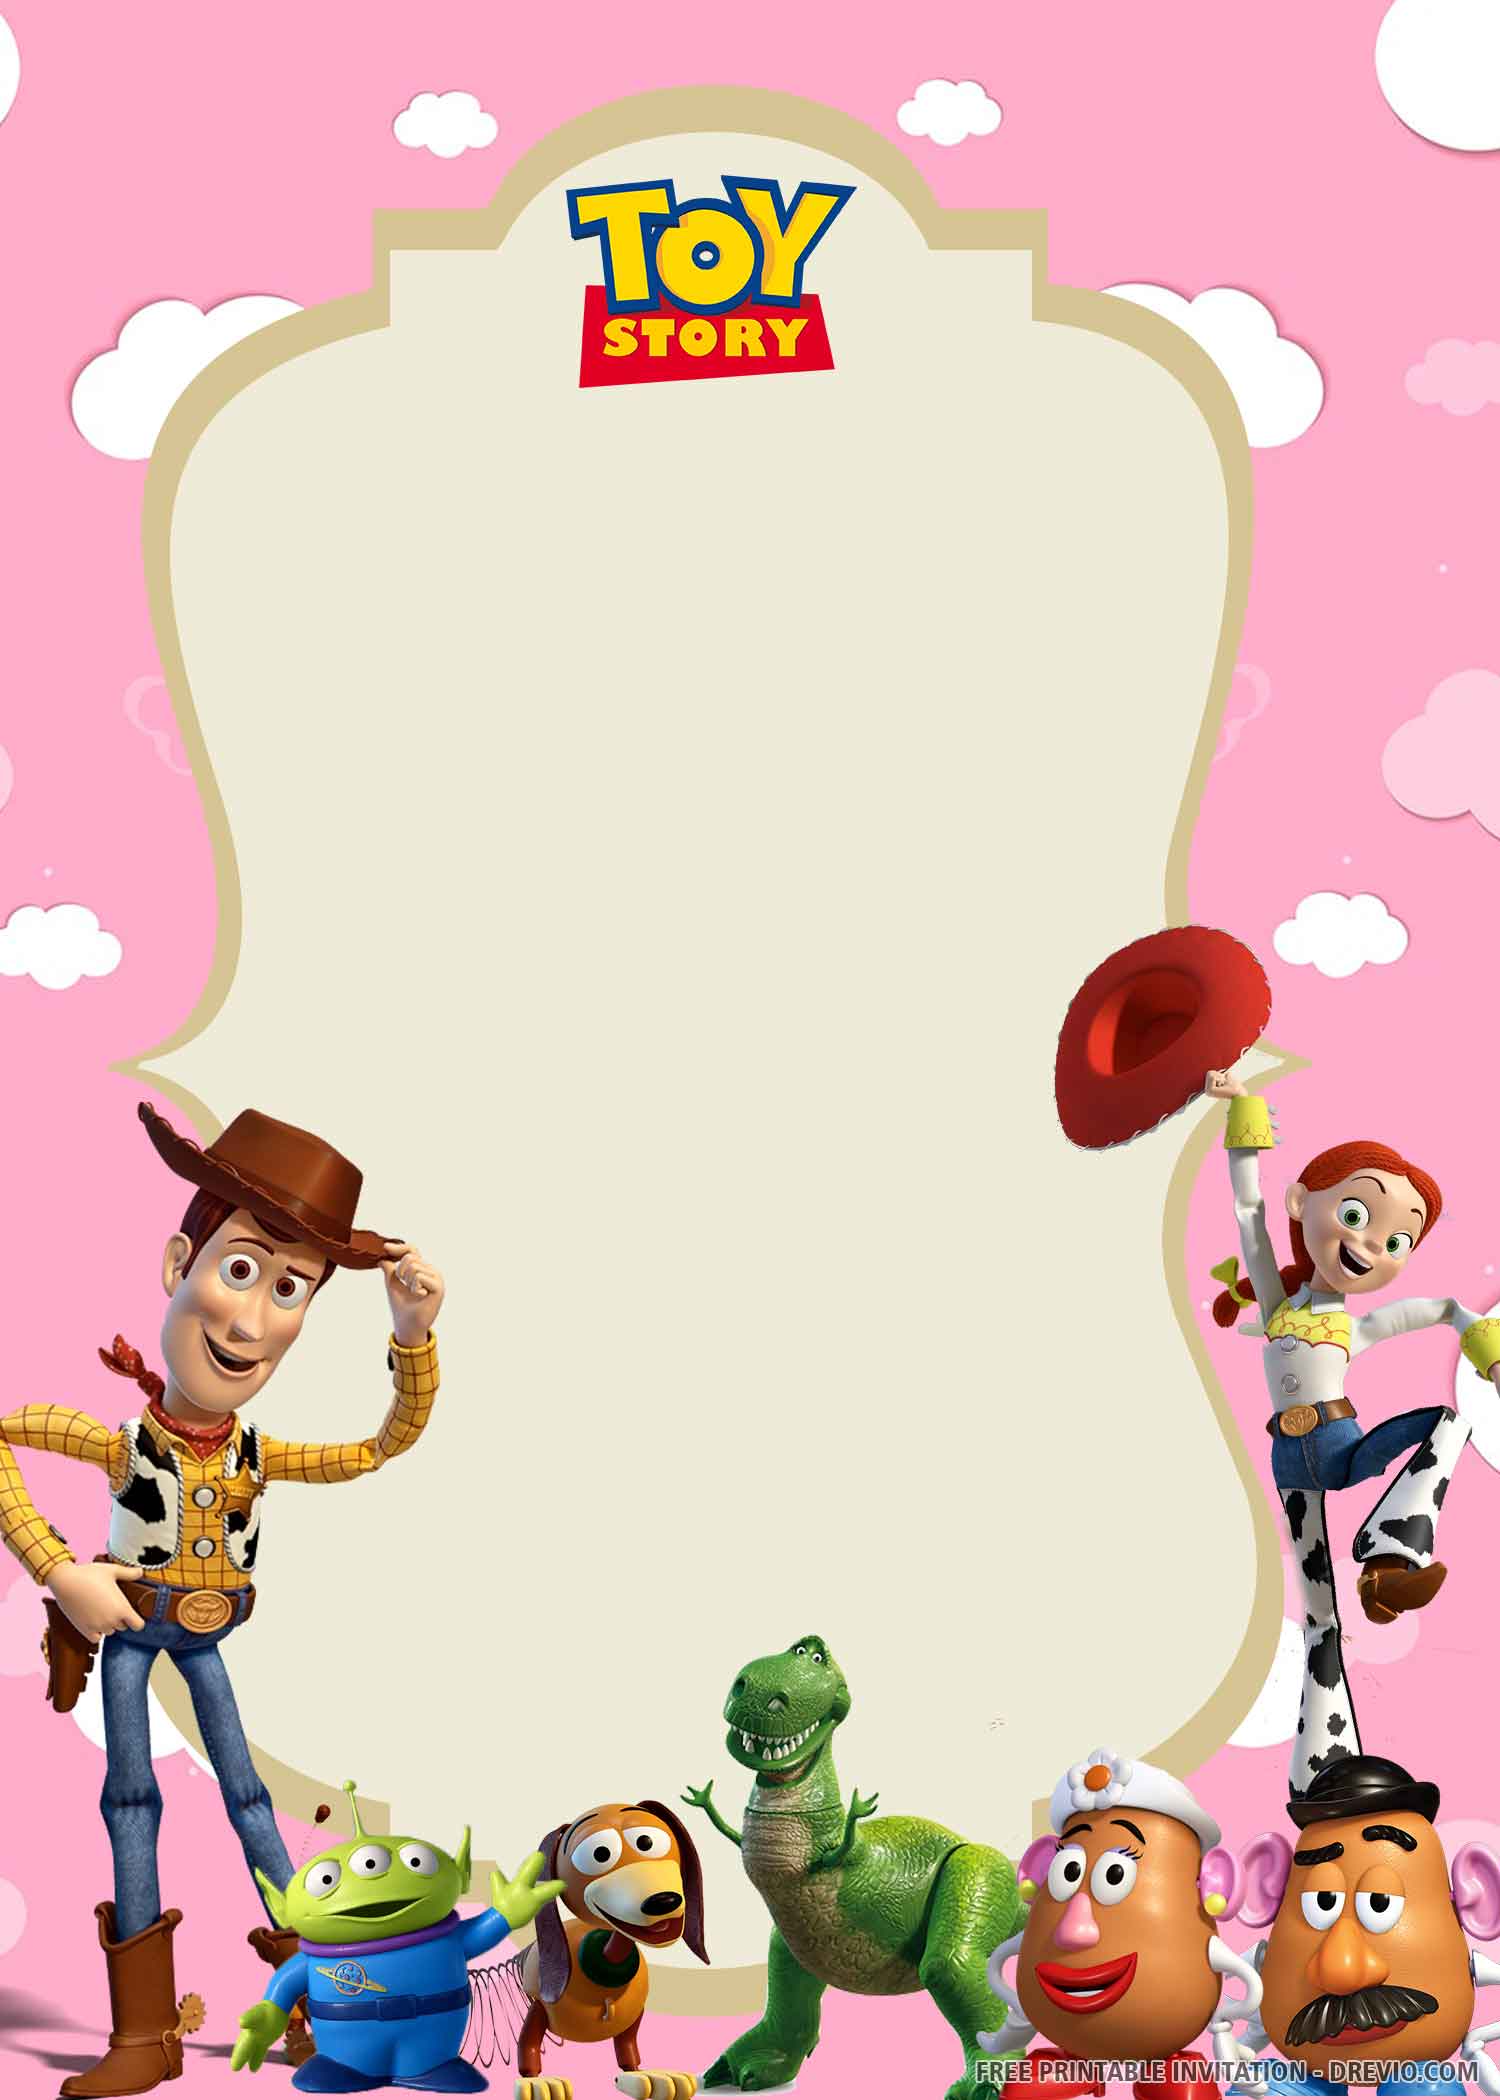 Free Printable Toy Story Birthday Invitation Template Download Hundreds Free Printable Birthday Invitation Templates